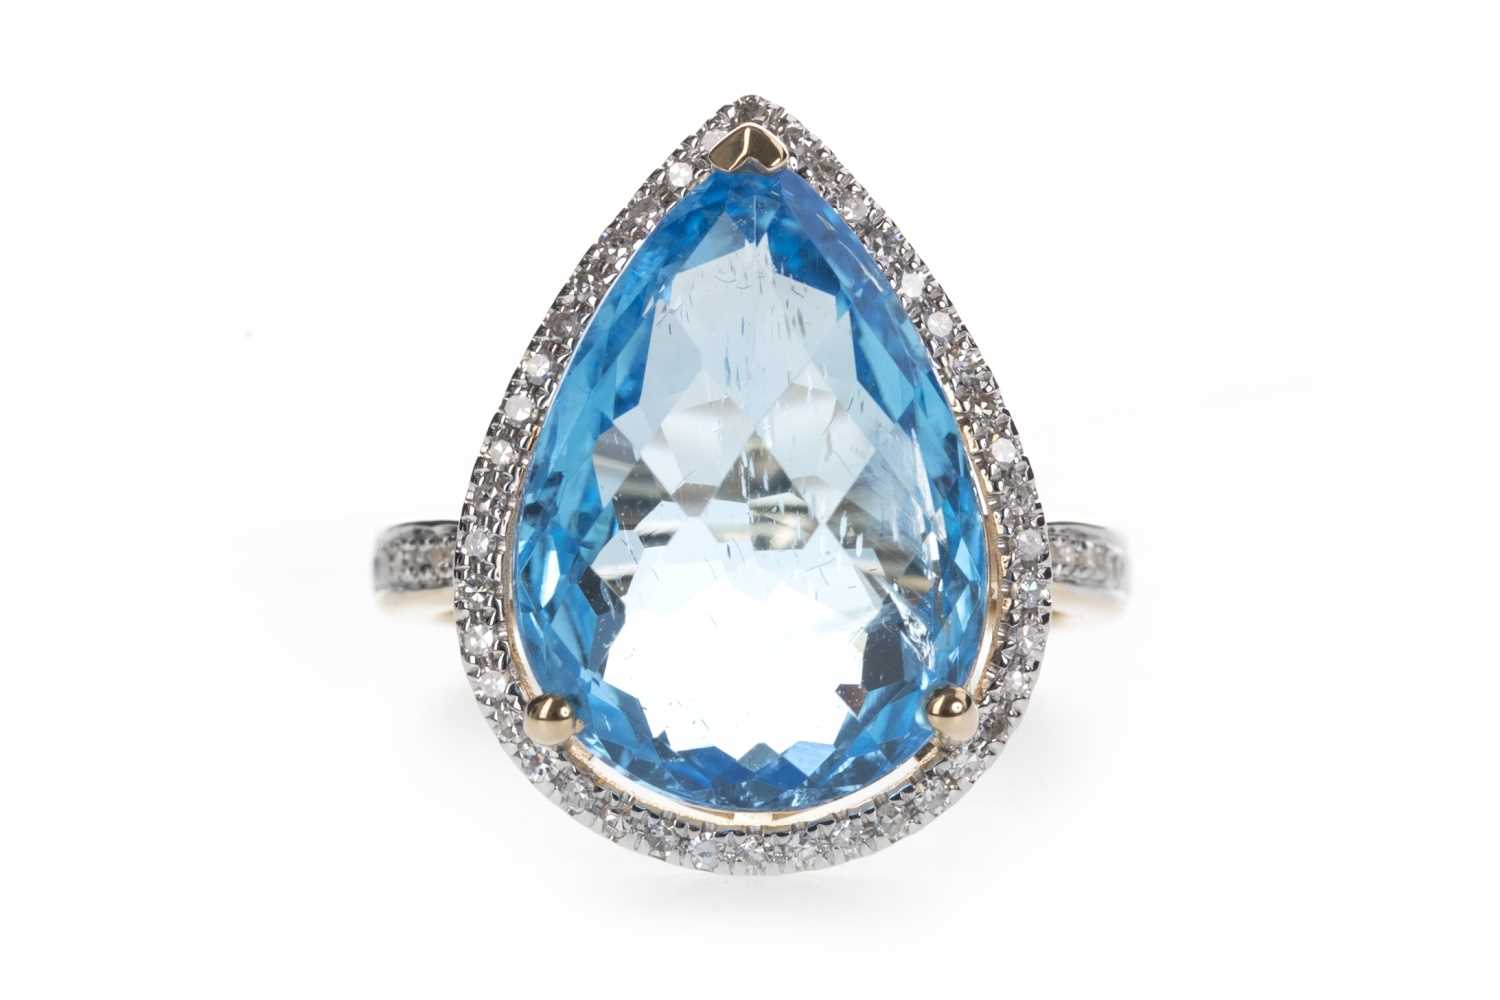 Lot 875 - A BLUE TOPAZ AND DIAMOND RING